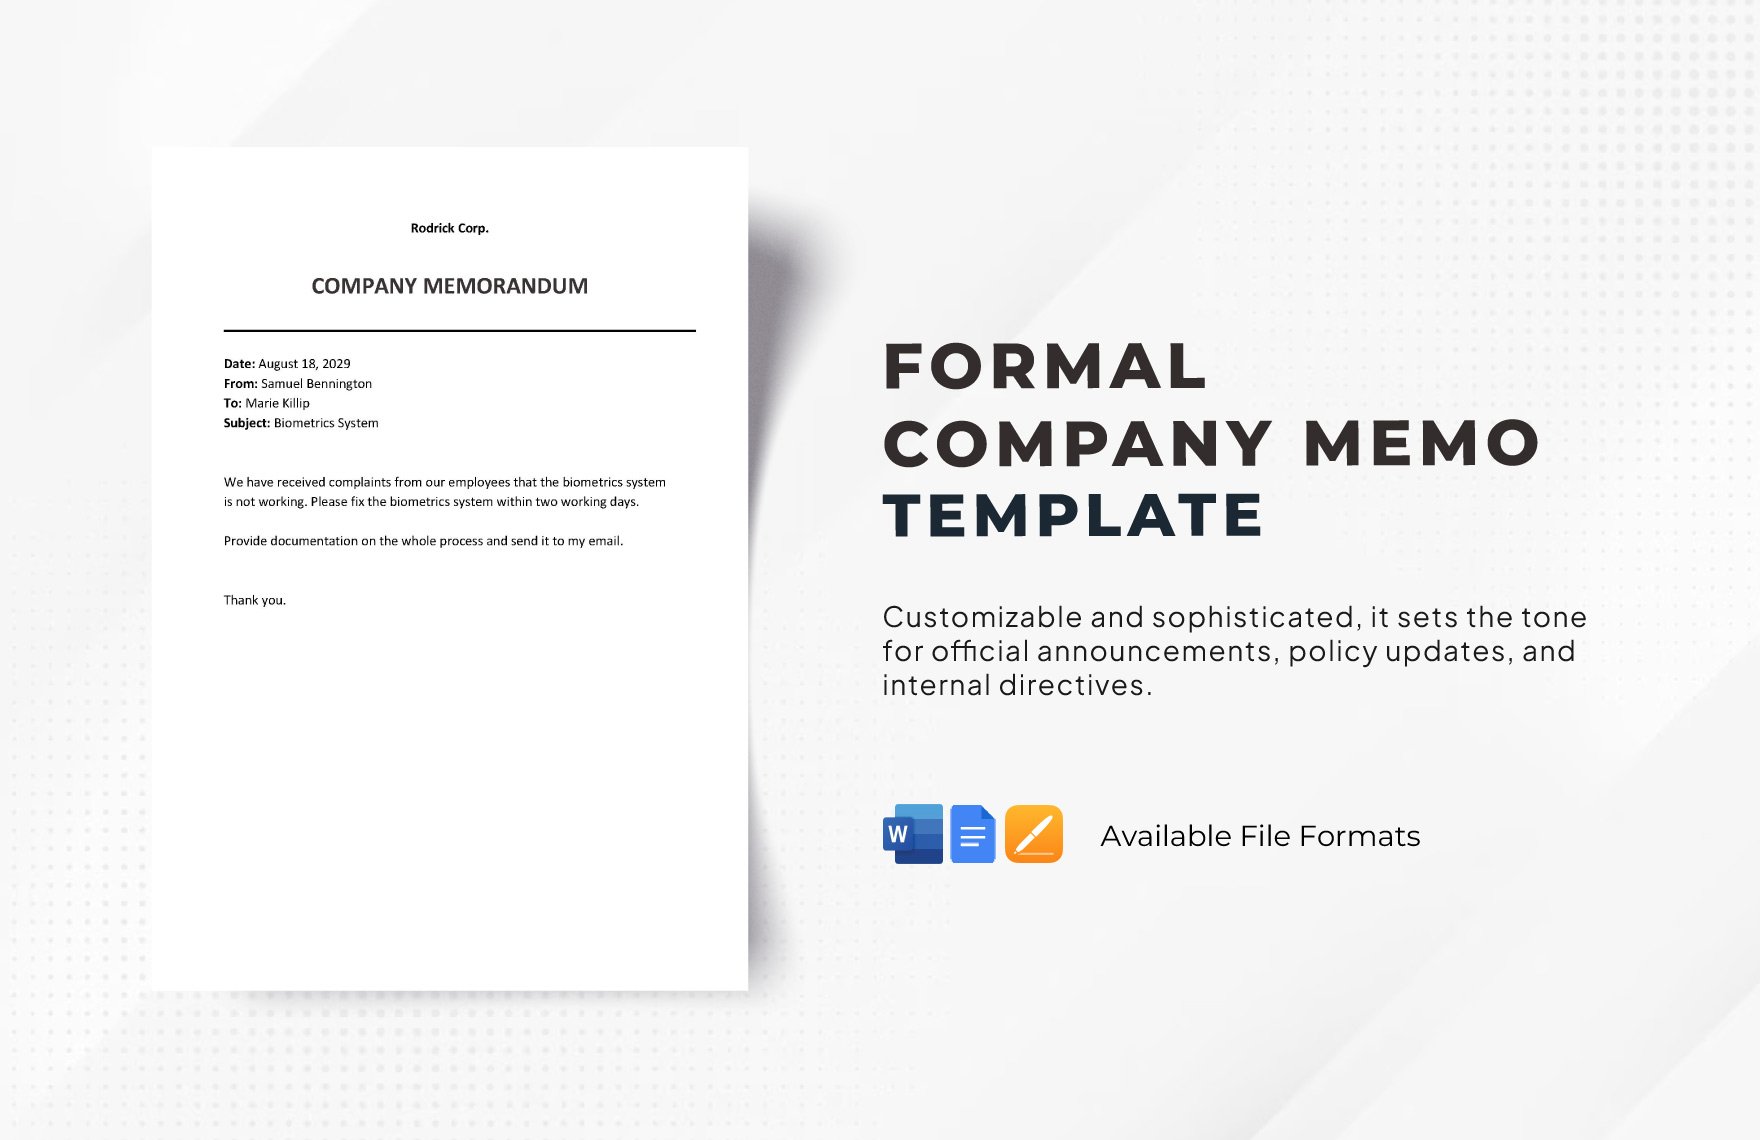 Formal Company Memo Template in Word, Google Docs, Apple Pages